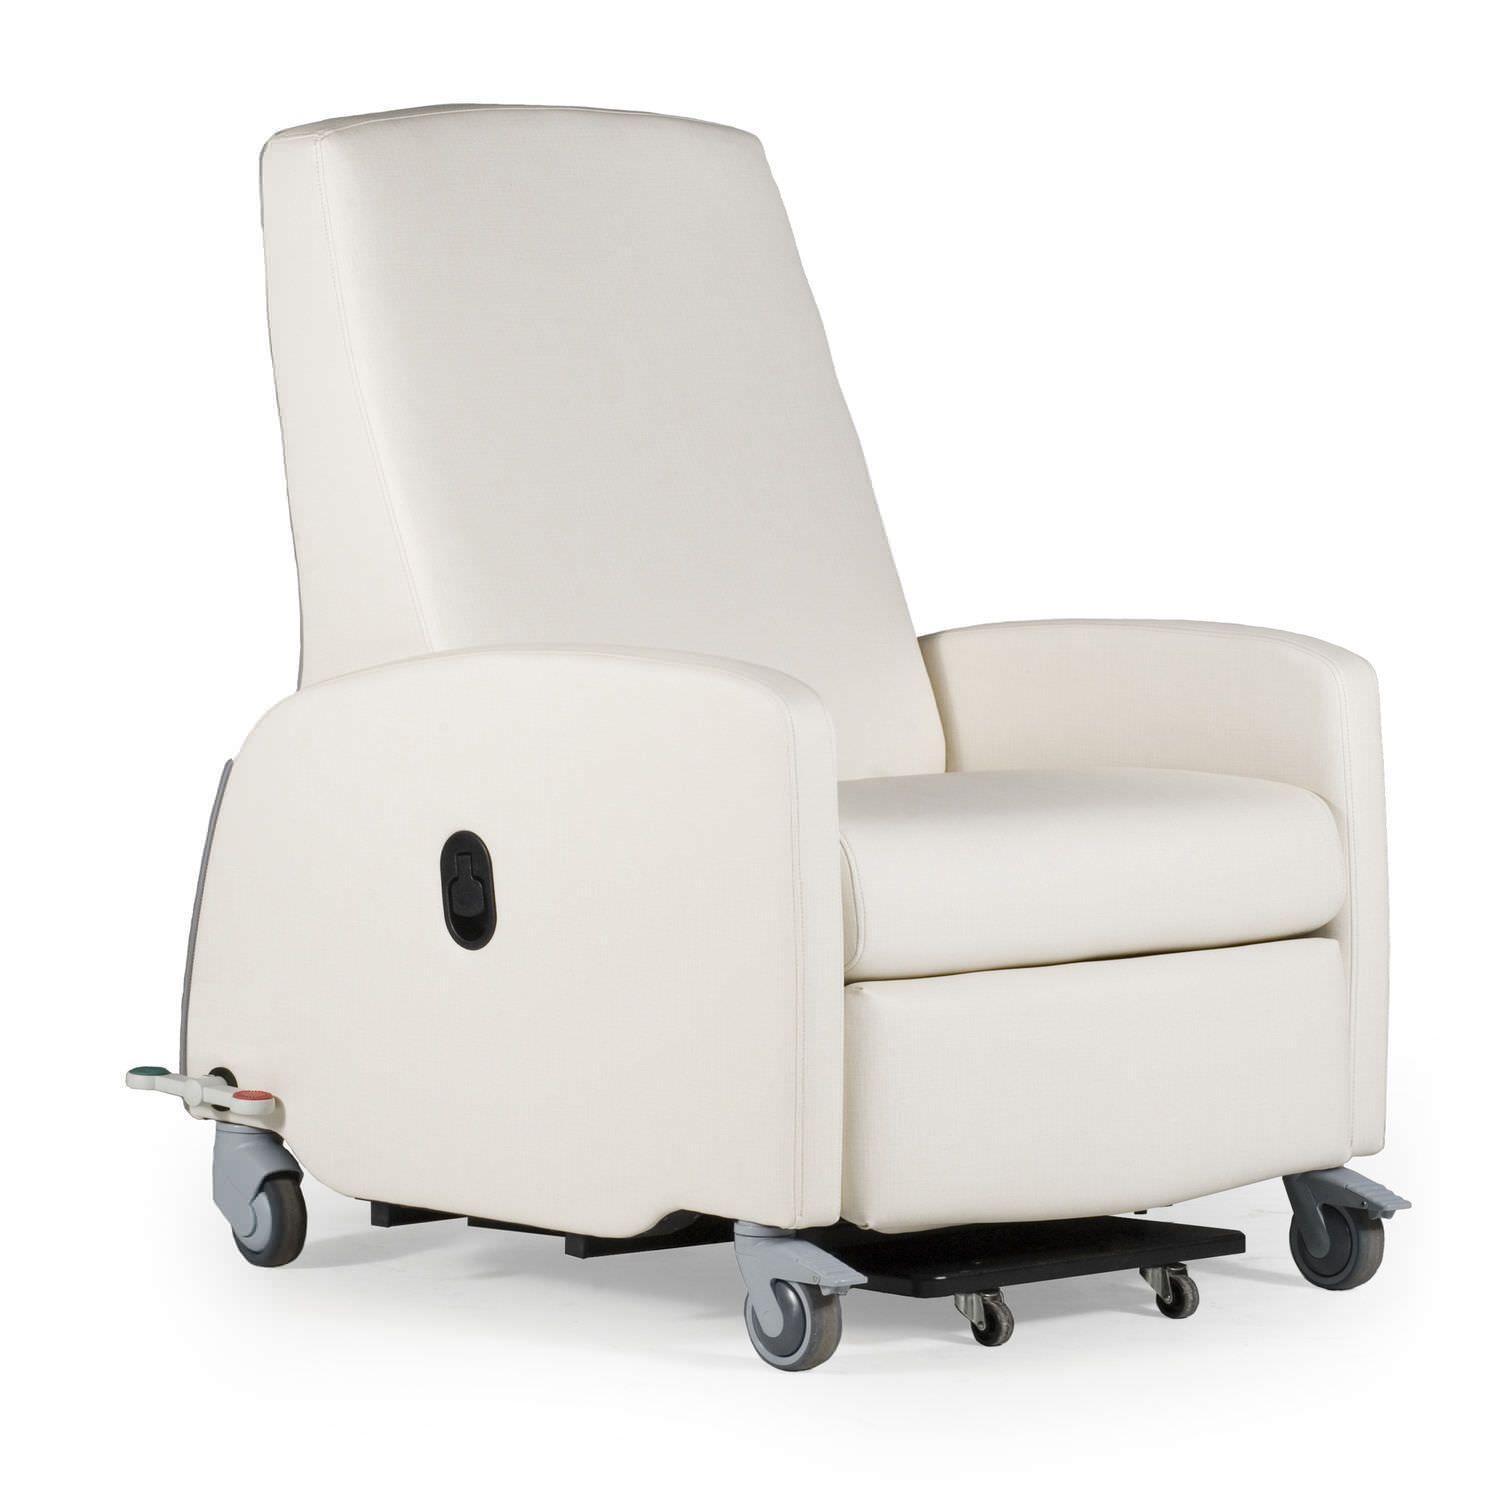 Healthcare facility convertible chair / on casters EV7000 series La-Z-Boy Contract Furniture